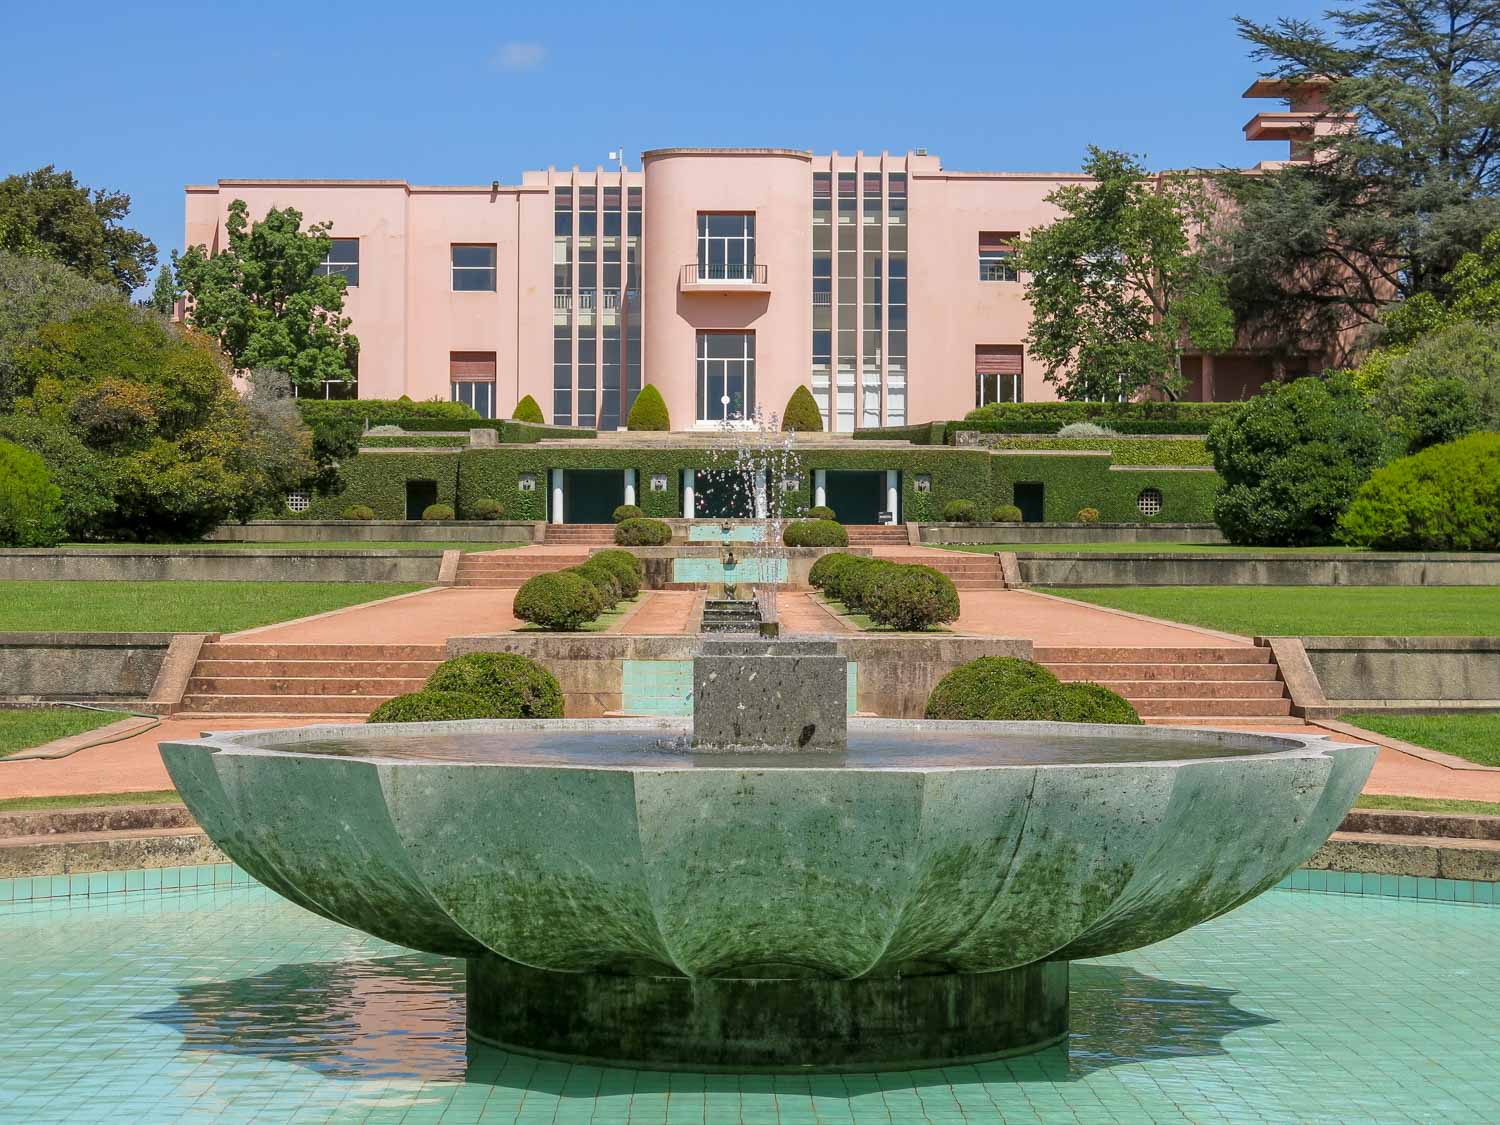 The pink art deco villa and fountain in the Serralves Gardens - visiting the treetop walkway and modern art museum are some of the more unusual things to do in Porto with kids